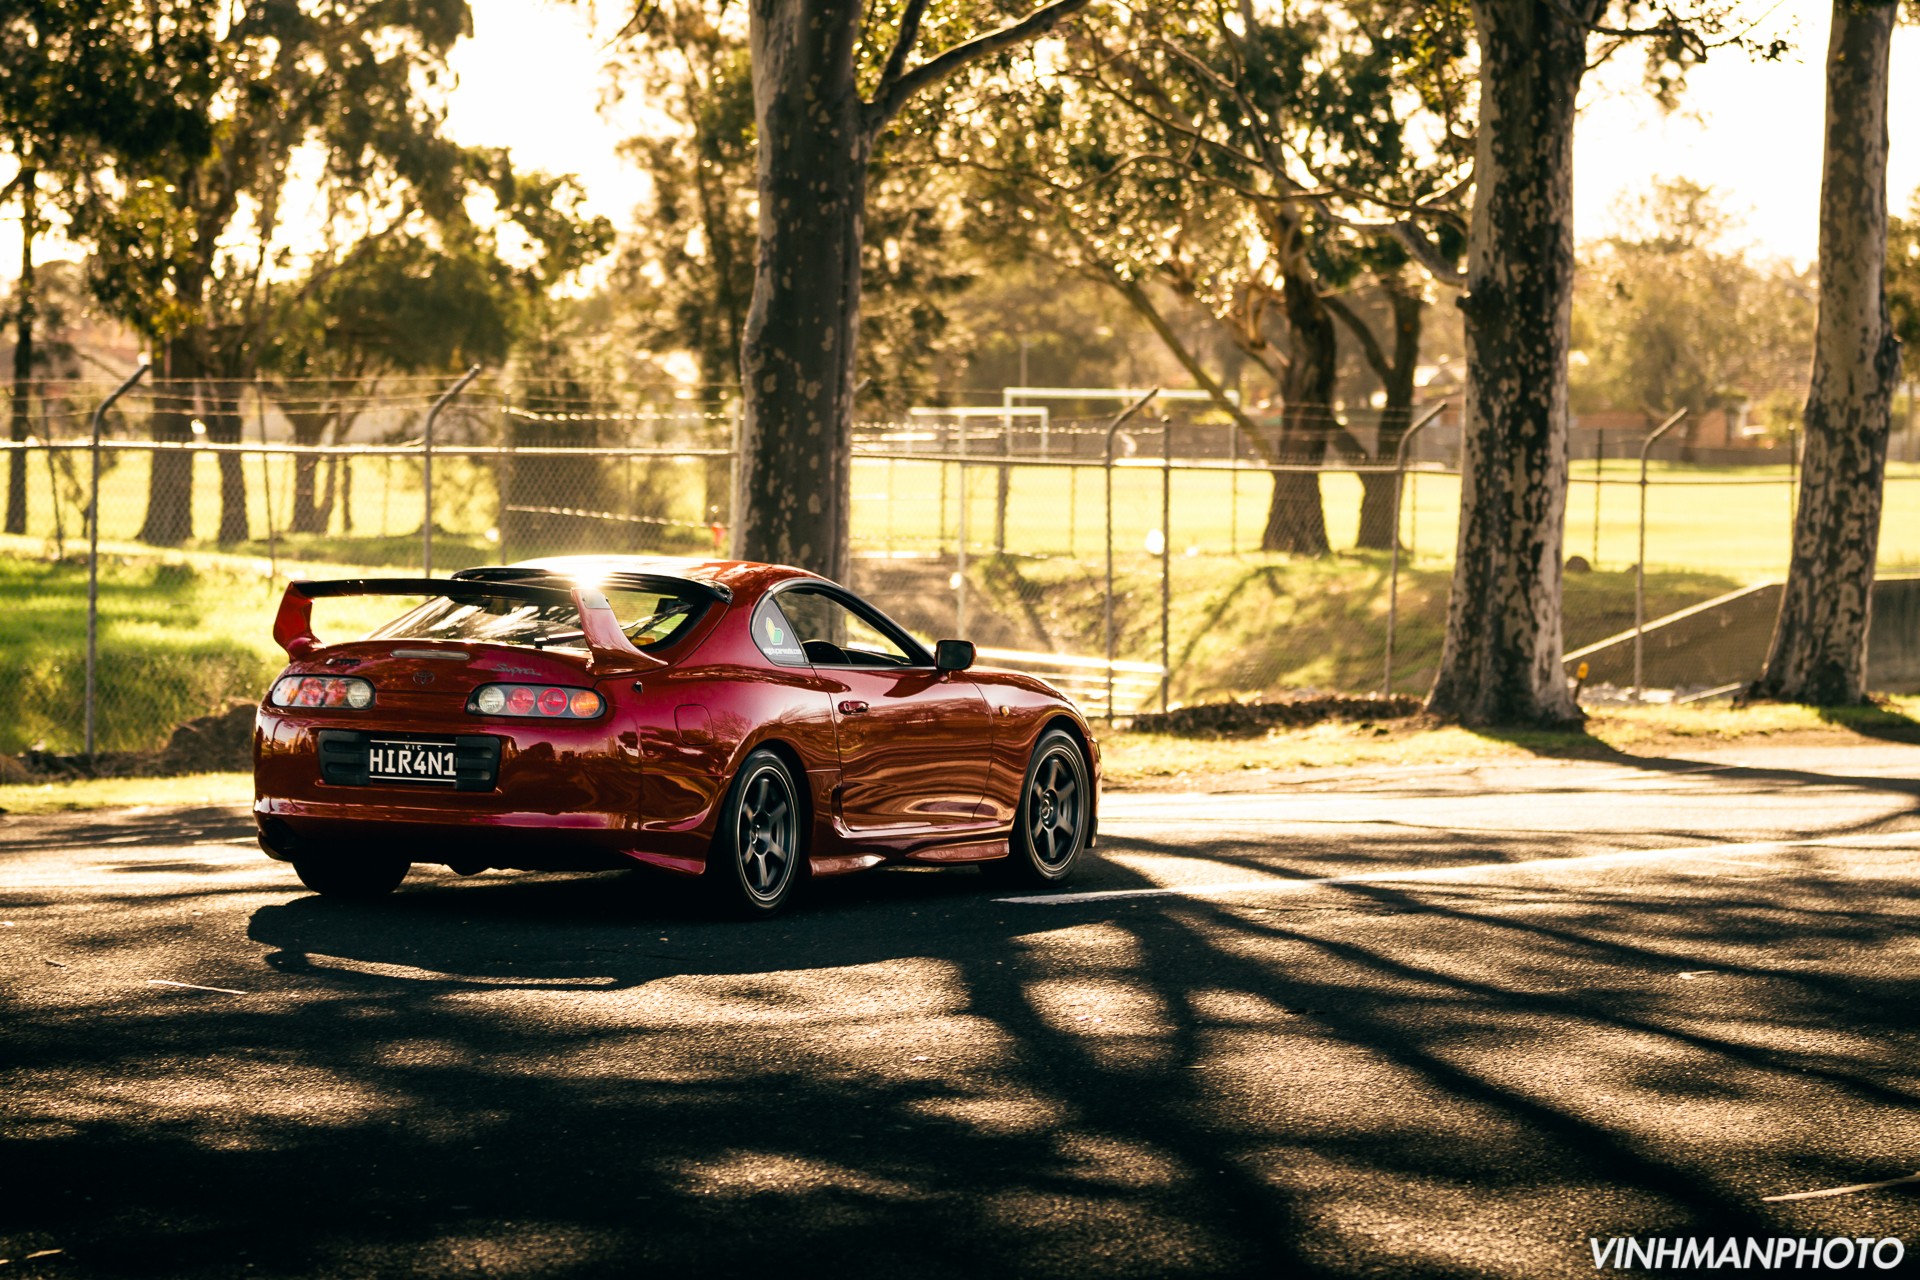 Toyota, Supra, Toyota Supra, Car, Vehicle, Trees, Red Cars Wallpaper HD / Desktop and Mobile Background